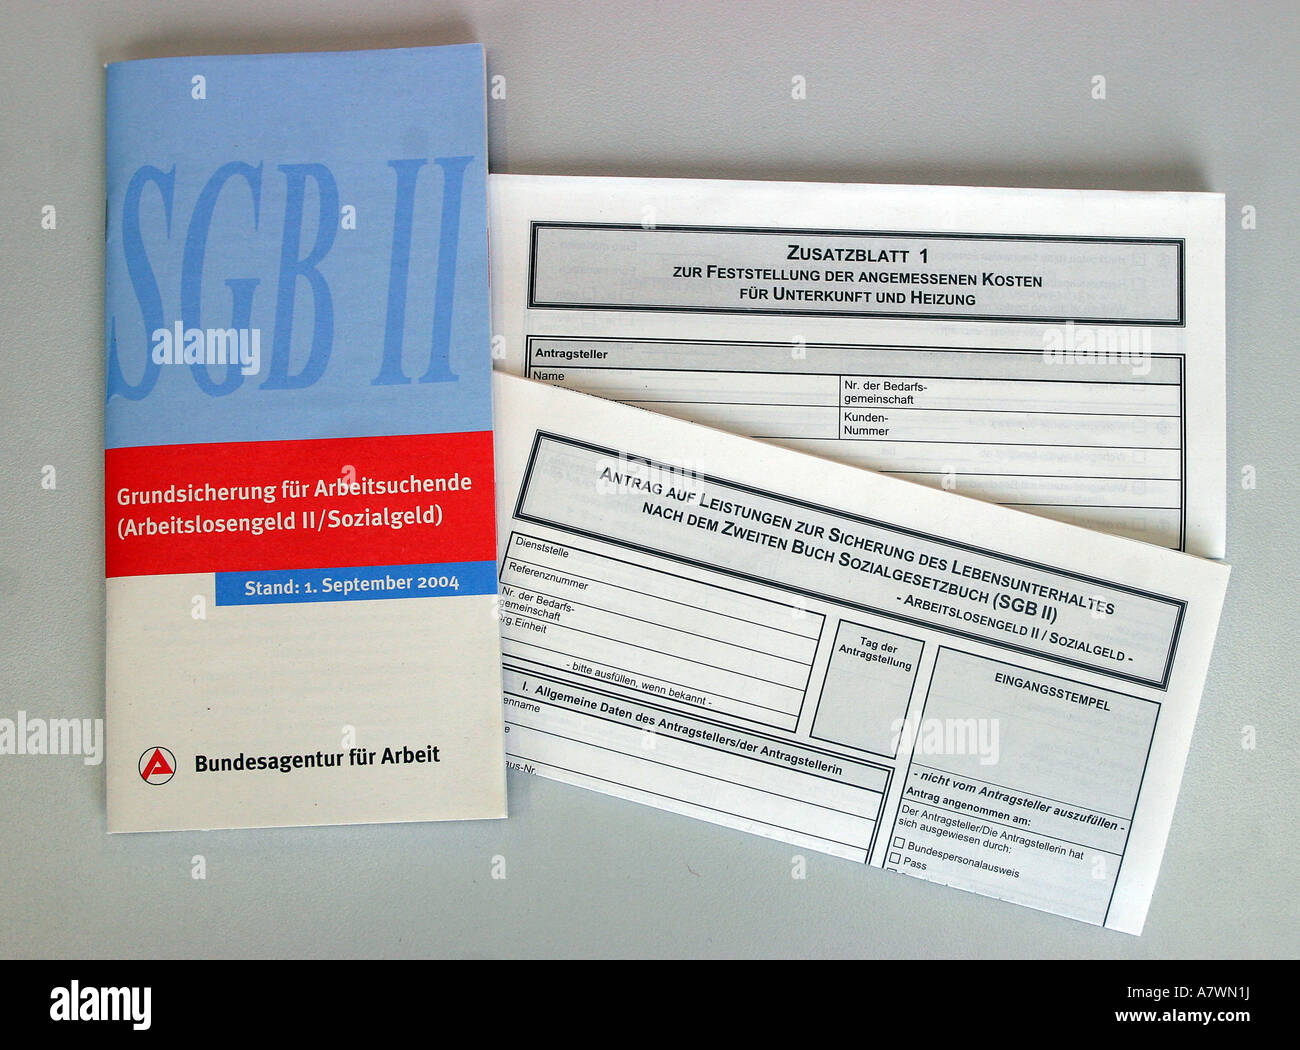 Form to get benefit compensation from the German federal labor office, so called Hartz IV. Stock Photo